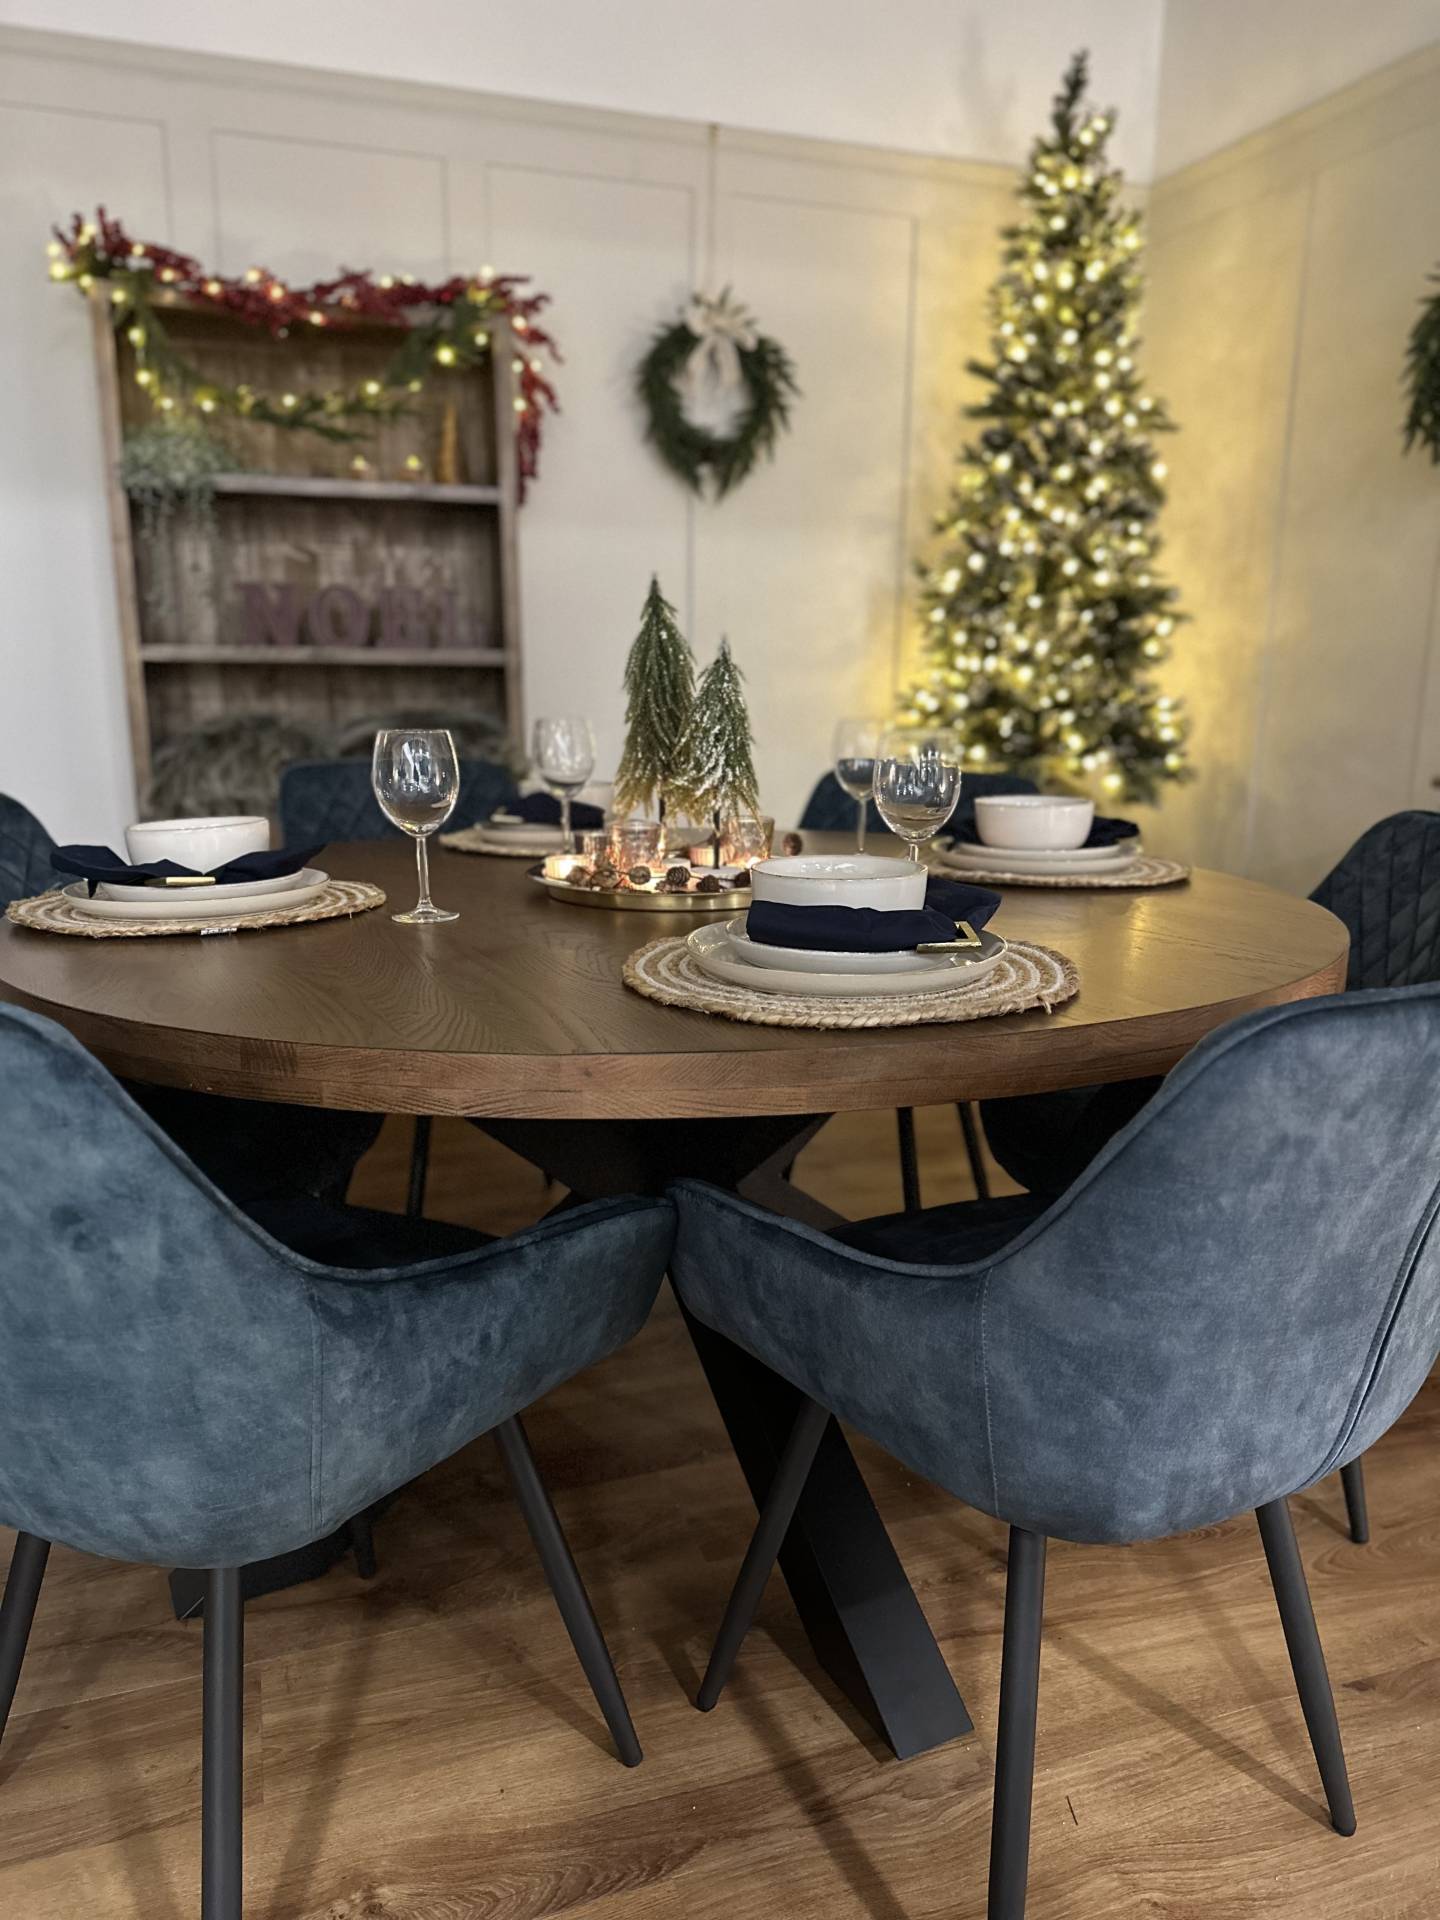 Round Dining Table & Chairs Set for Christmas